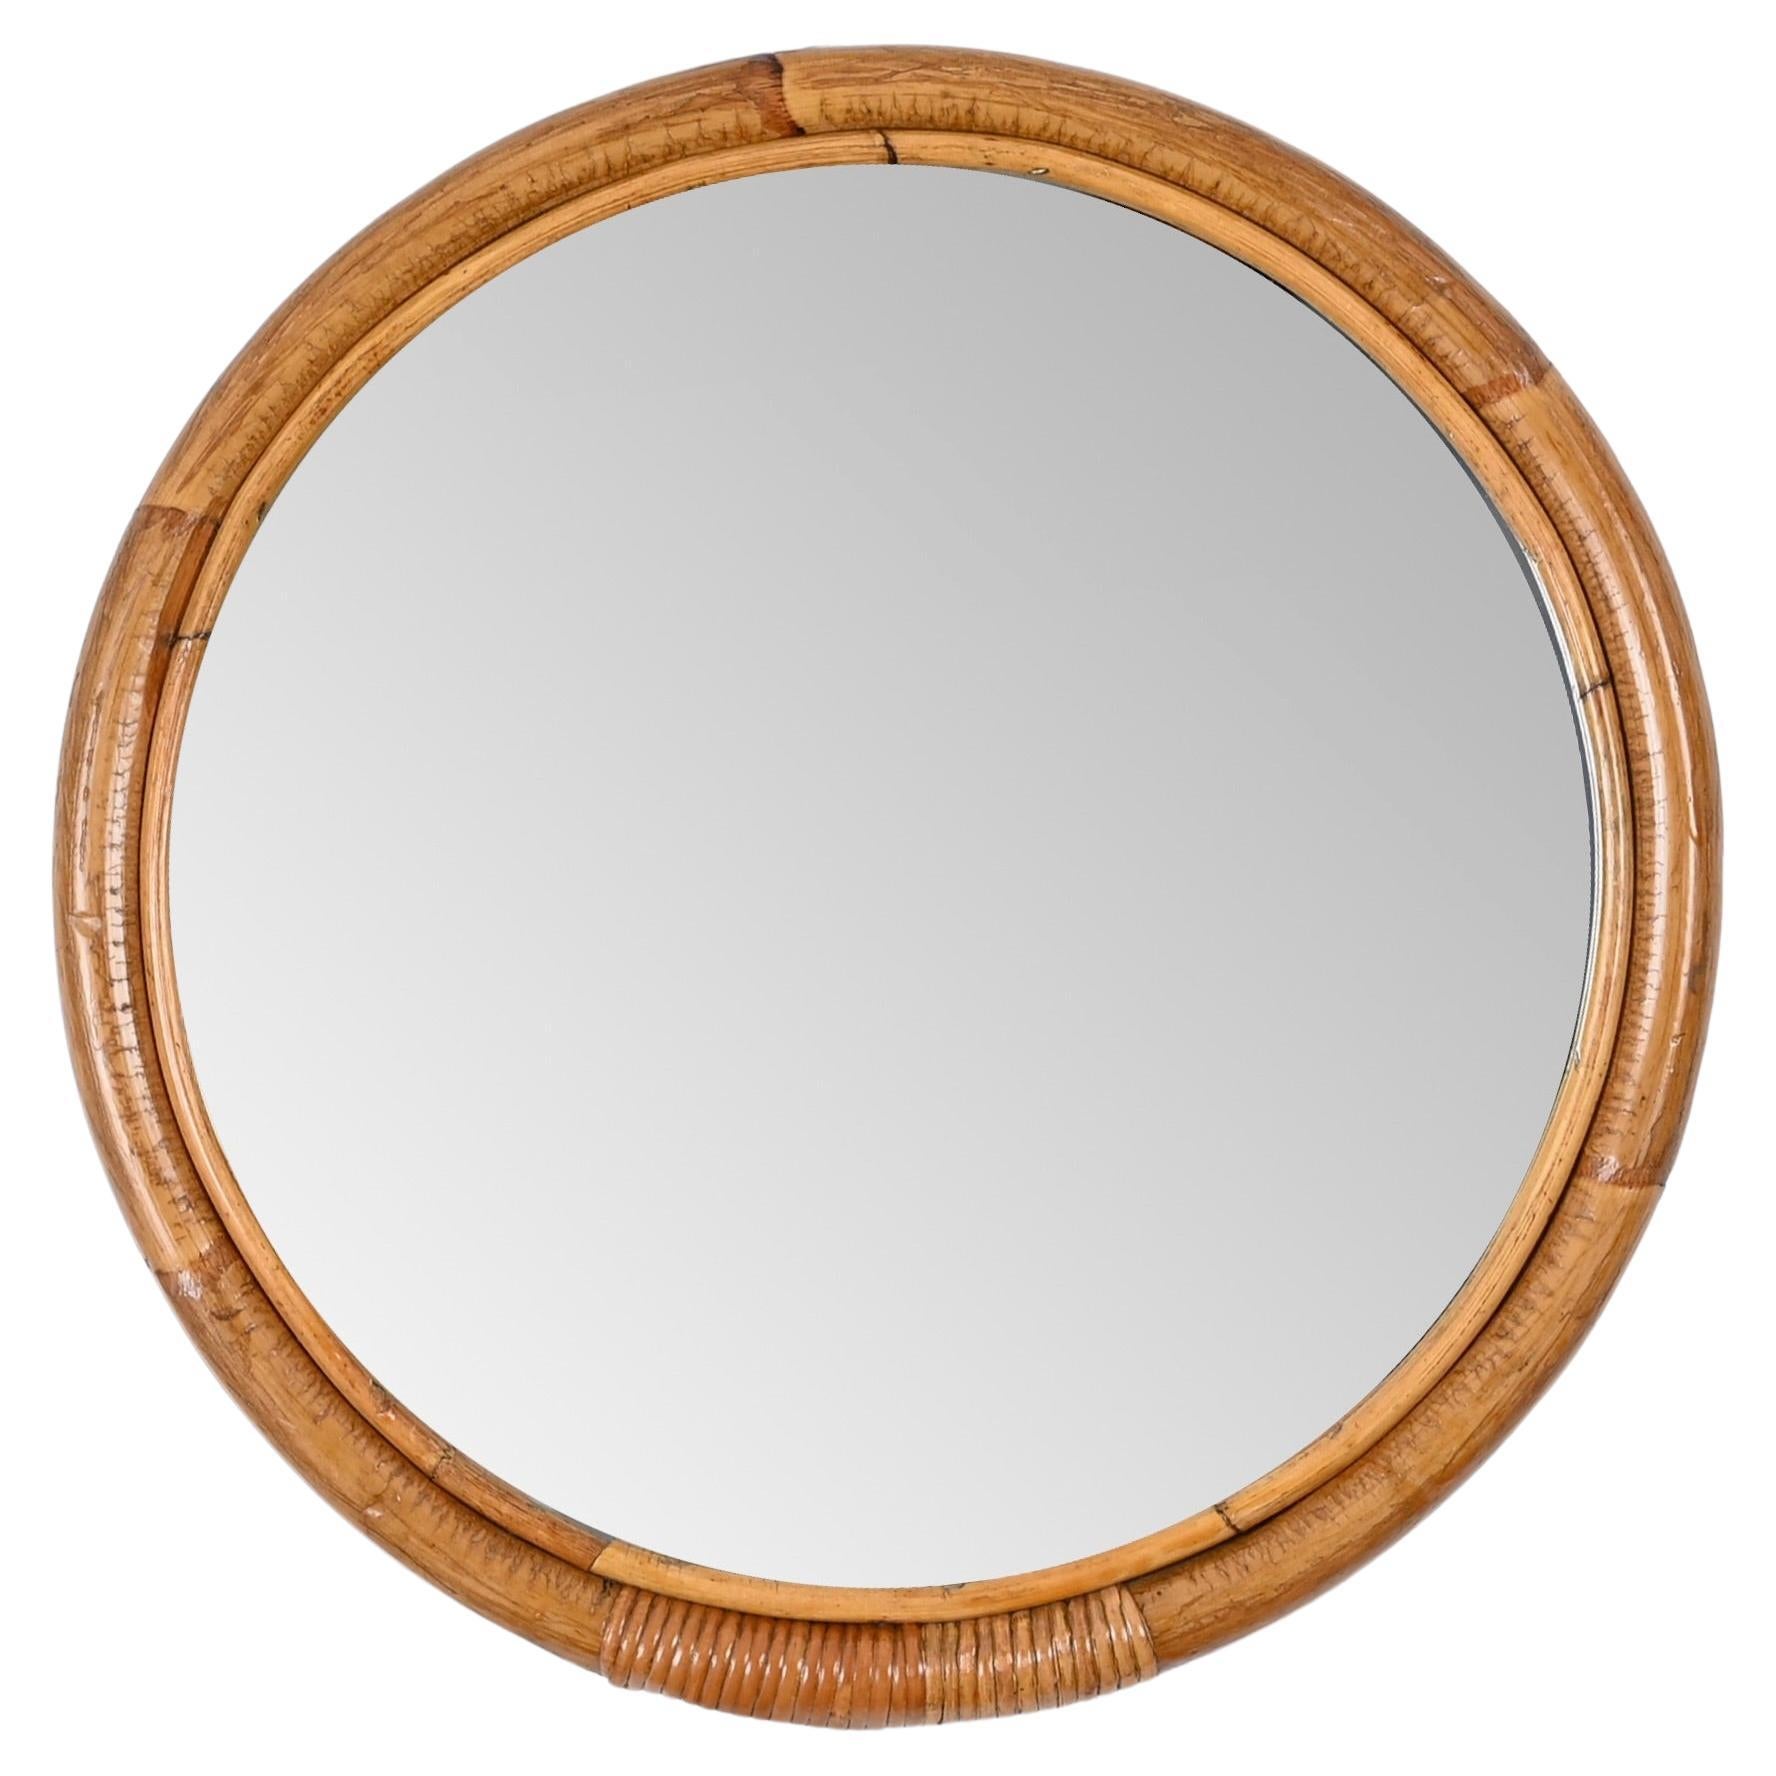 Midcentury Round Italian Mirror with Double Bamboo and Woven Wicker Frame, 1970s